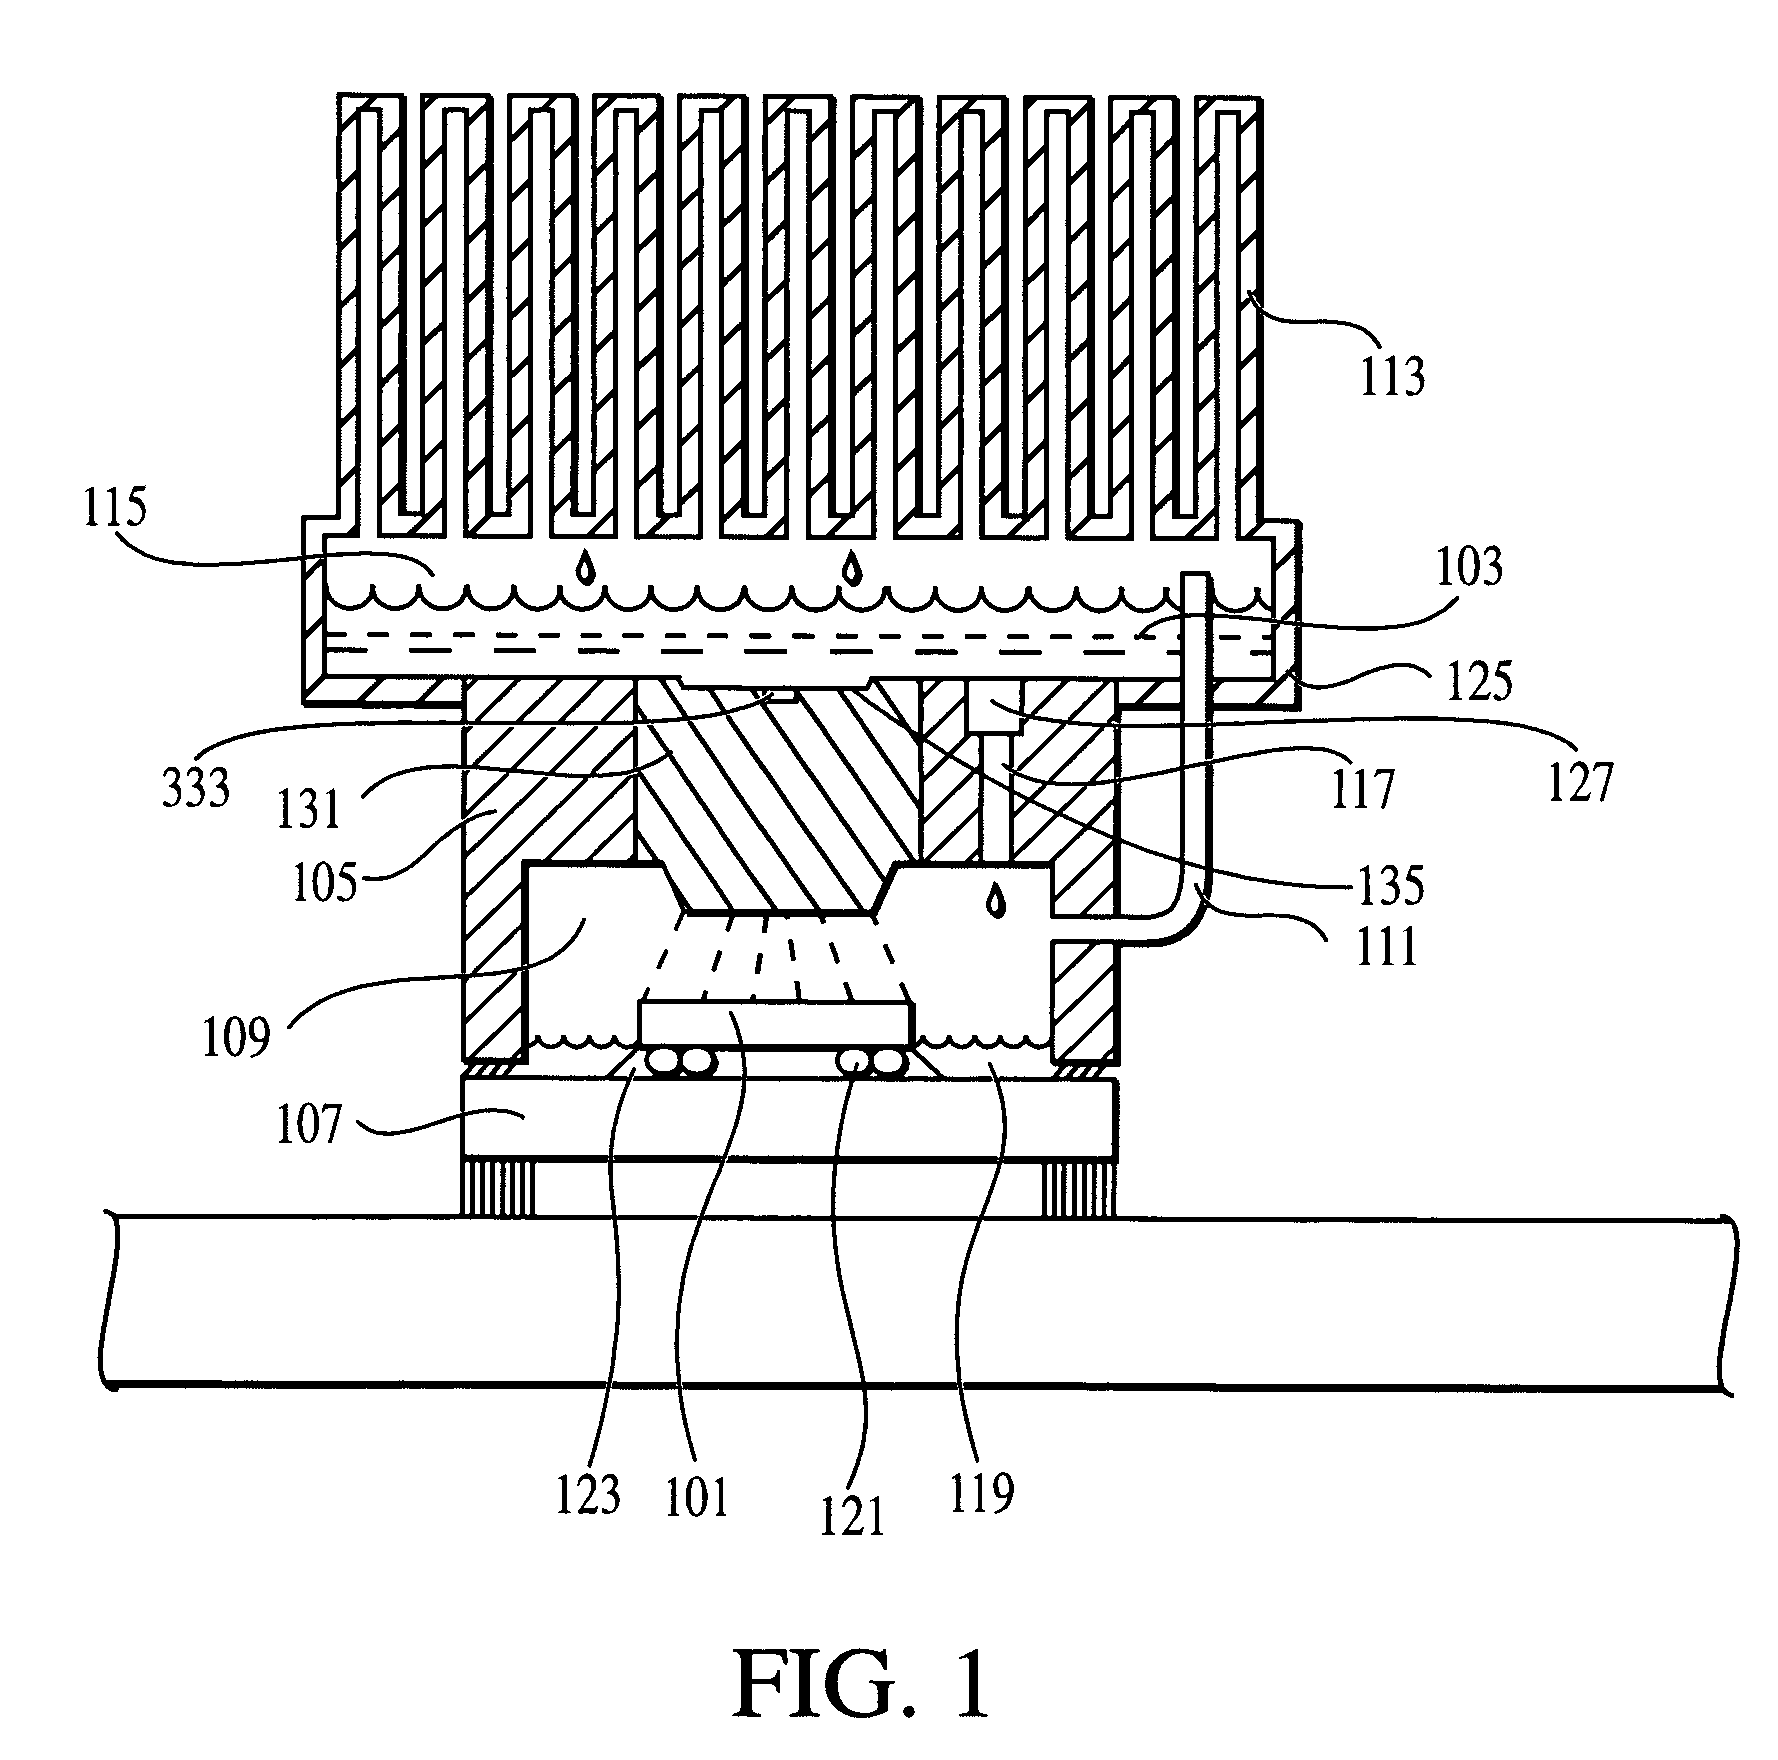 Multi-state spray cooling system